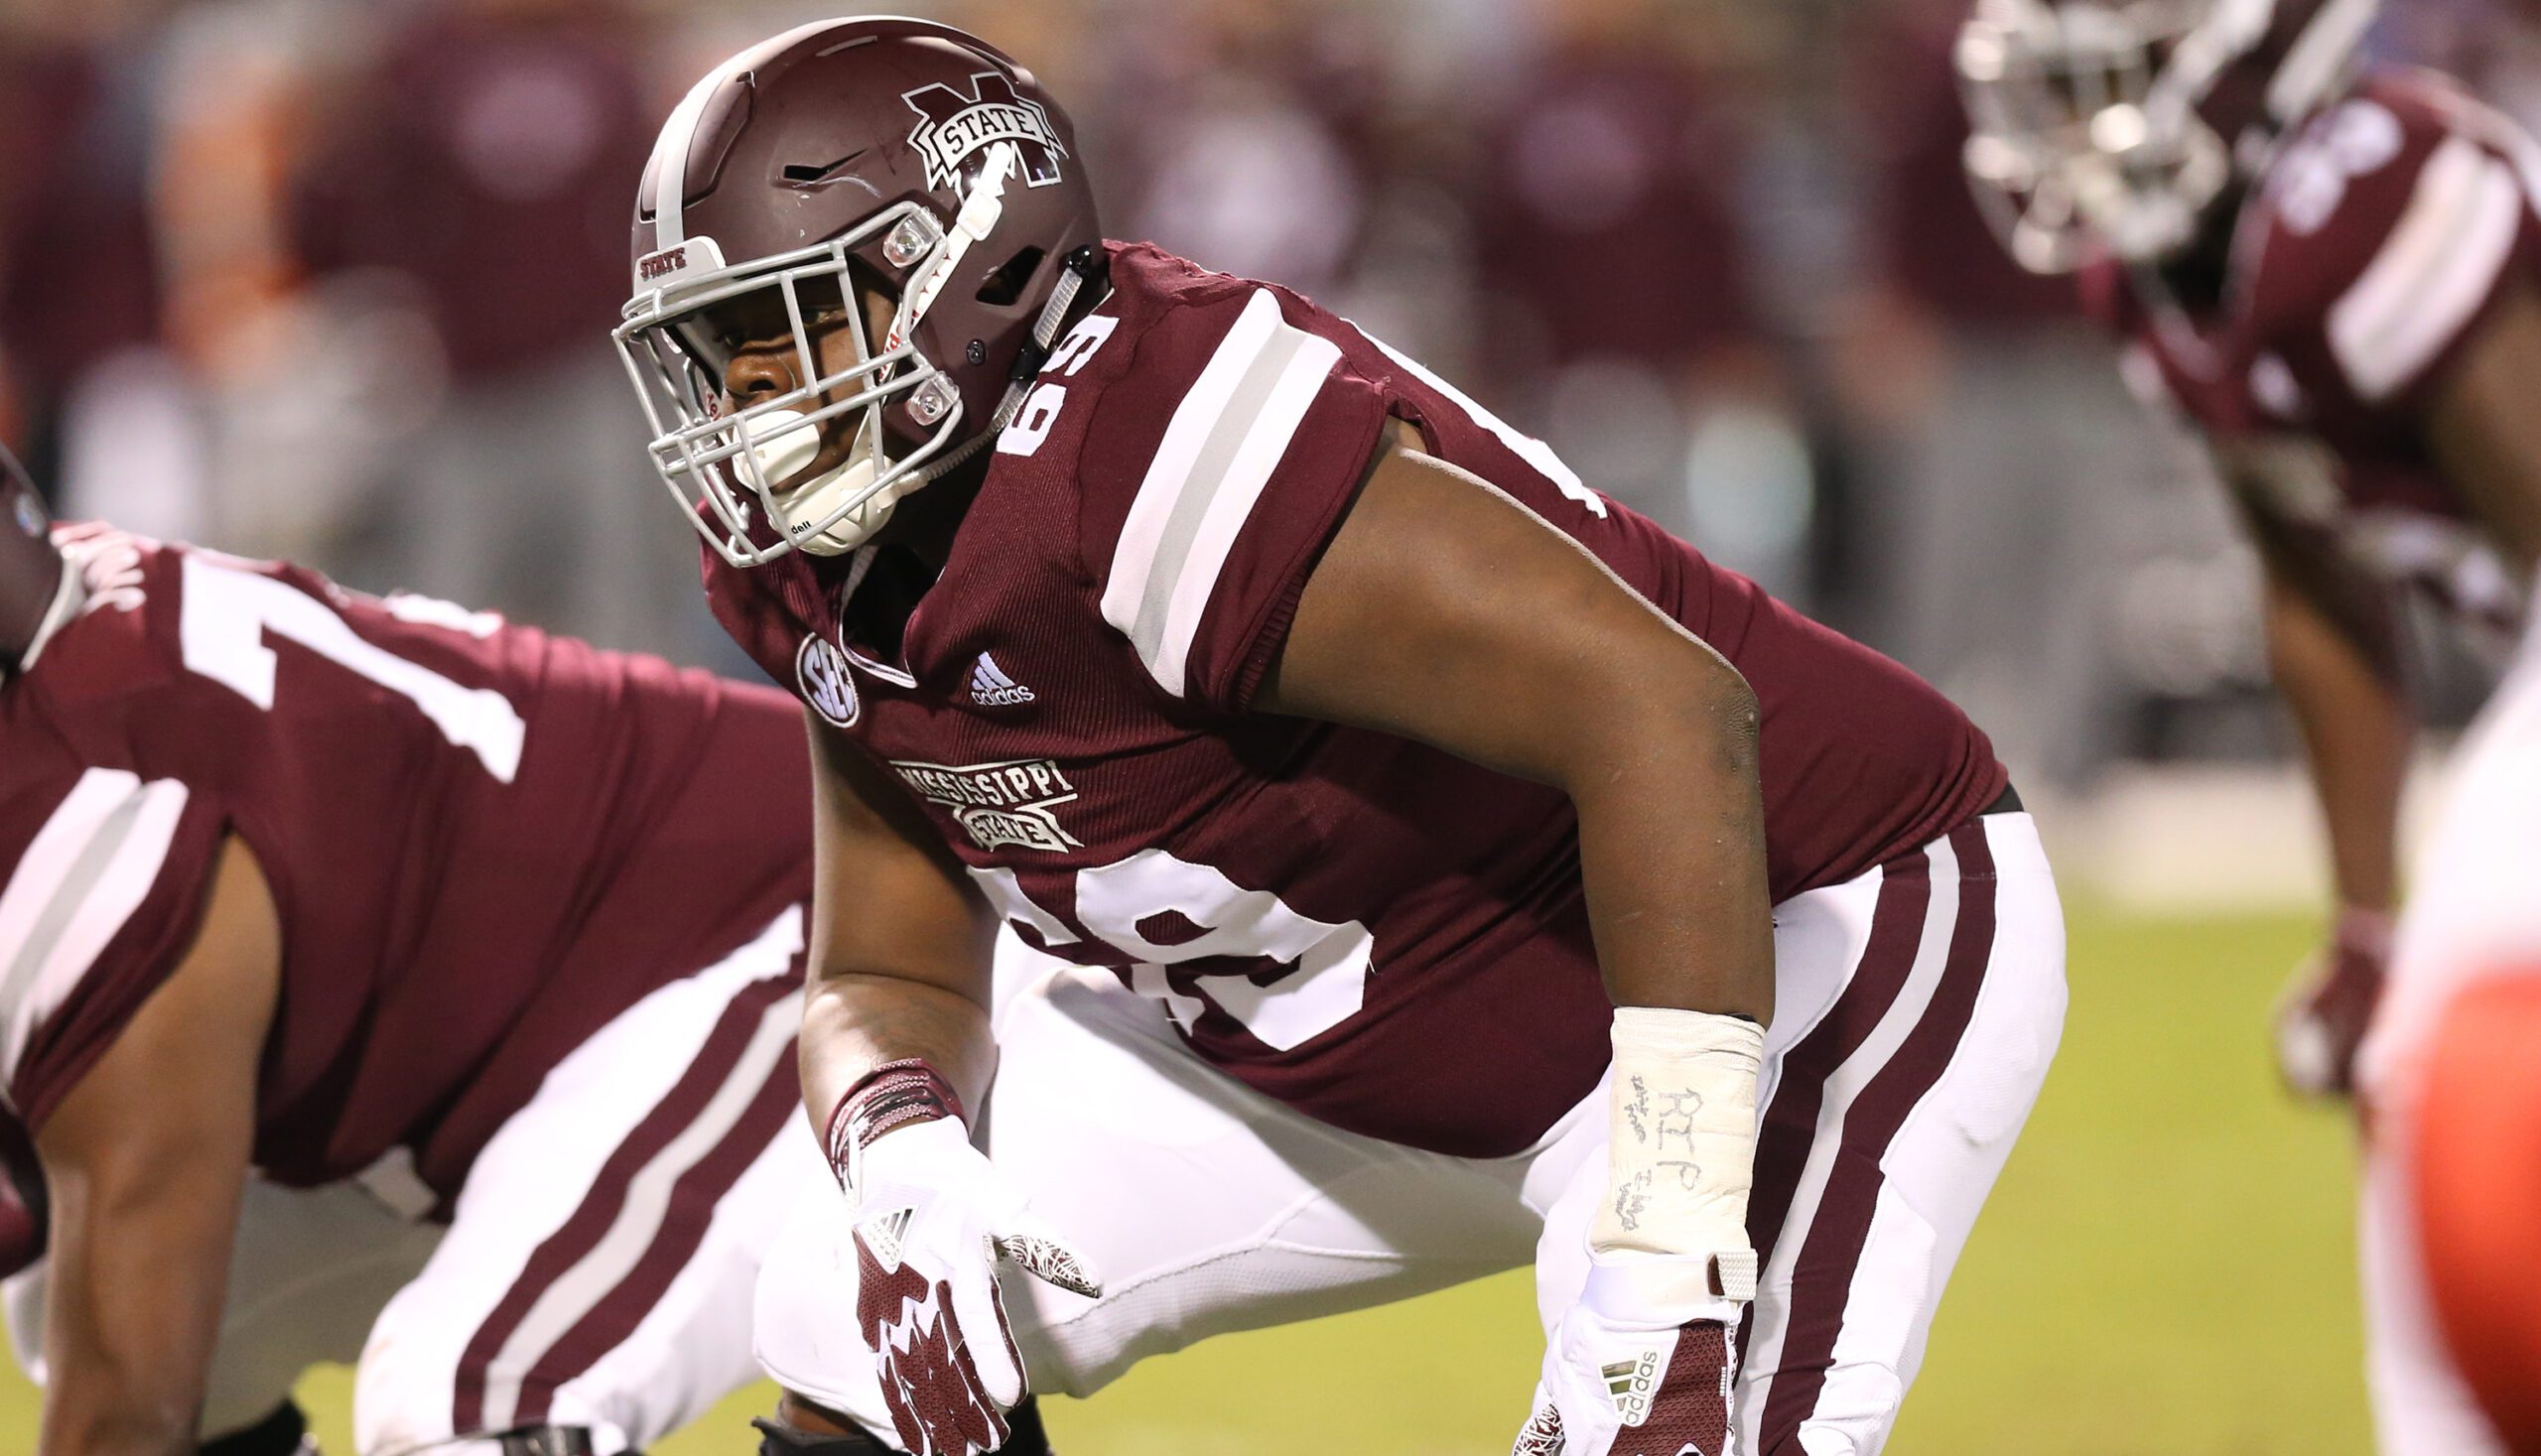 Kwatrivous Johnson is a highly effective run blocker for Mississippi State. Hula Bowl scout Ryan Jaffe breaks down the strengths and weaknesses of Johnson as an NFL Prospect in this article.